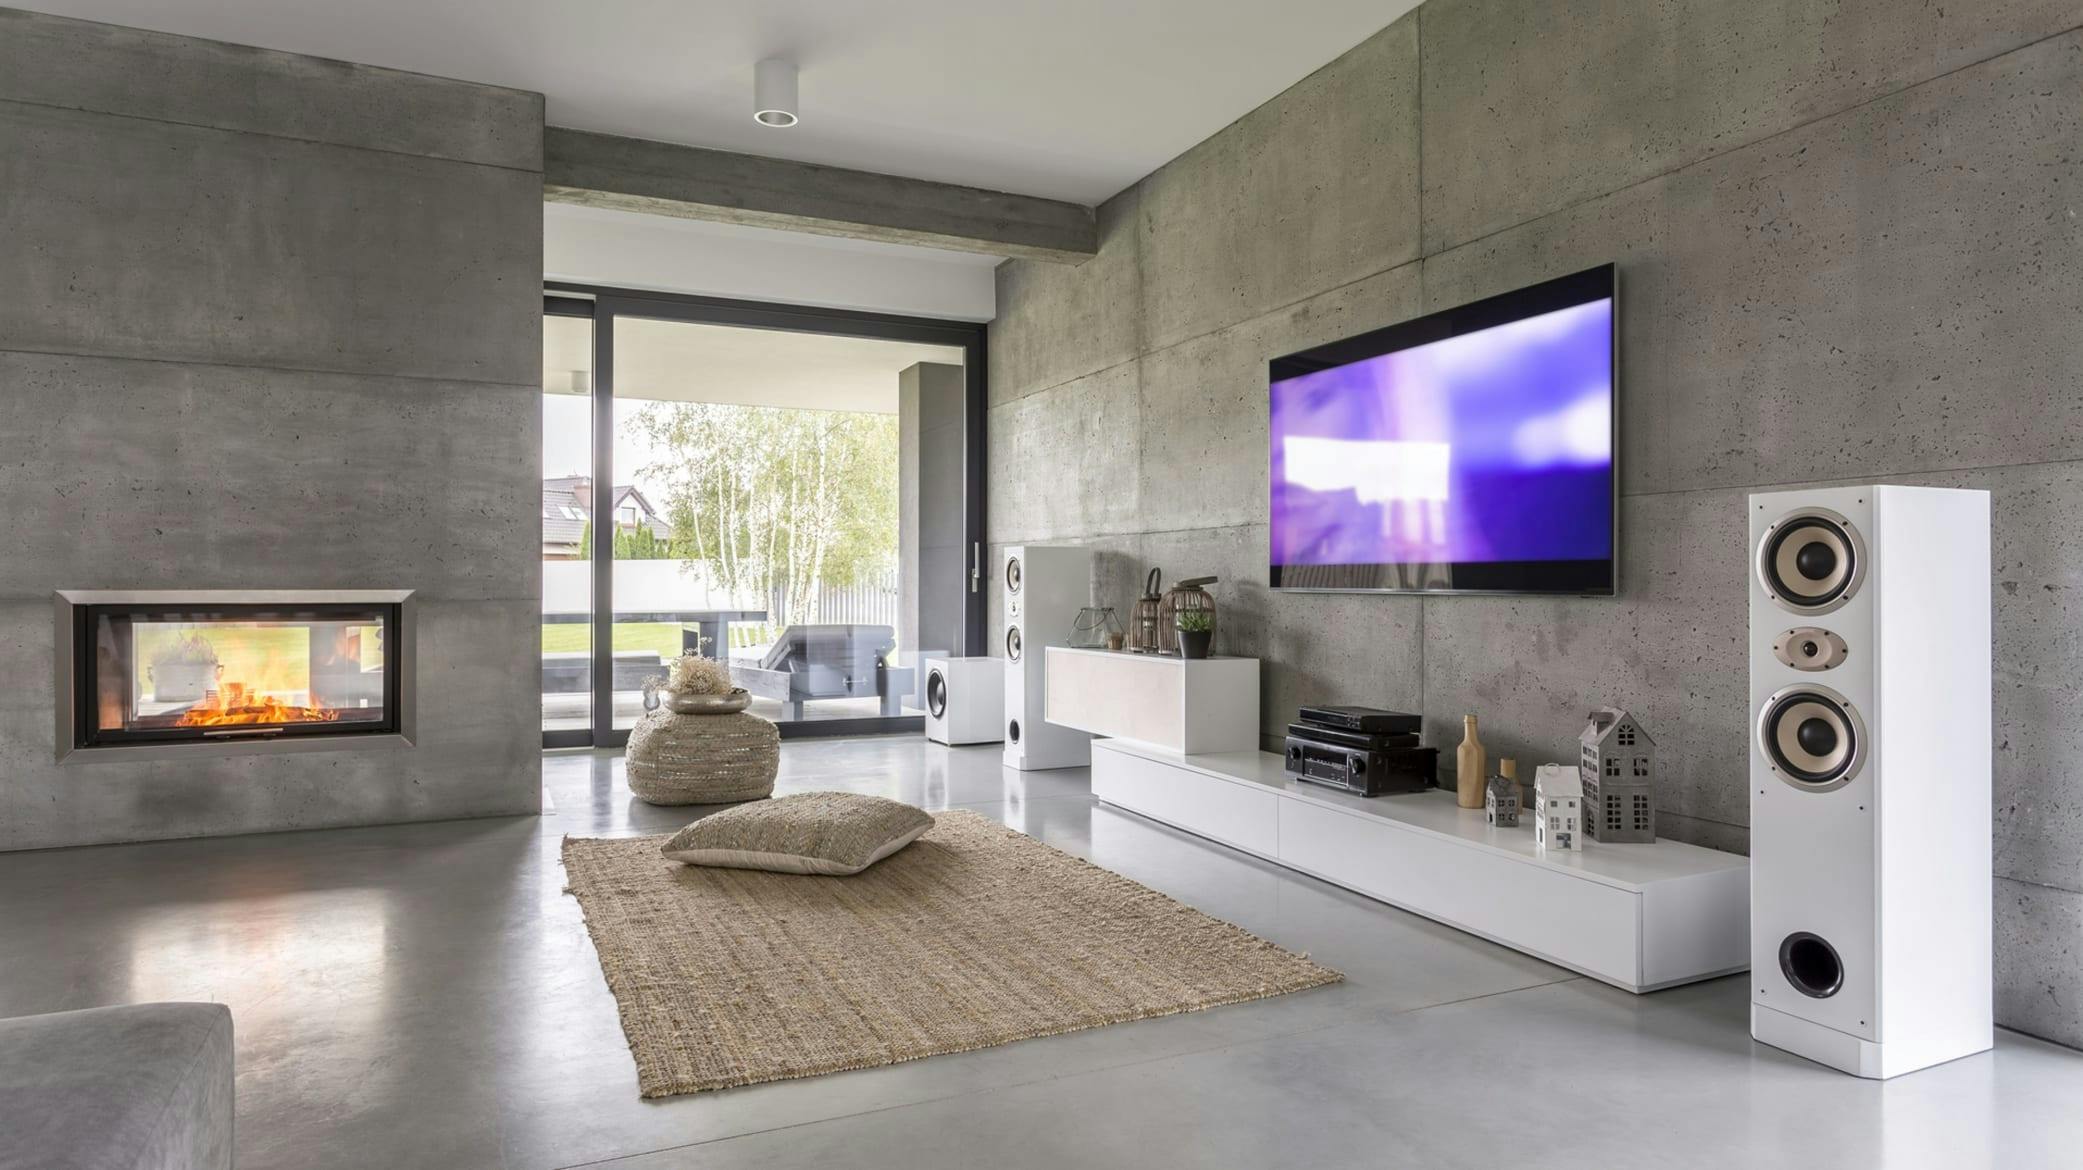 Living room with TV on the wall and fireplace